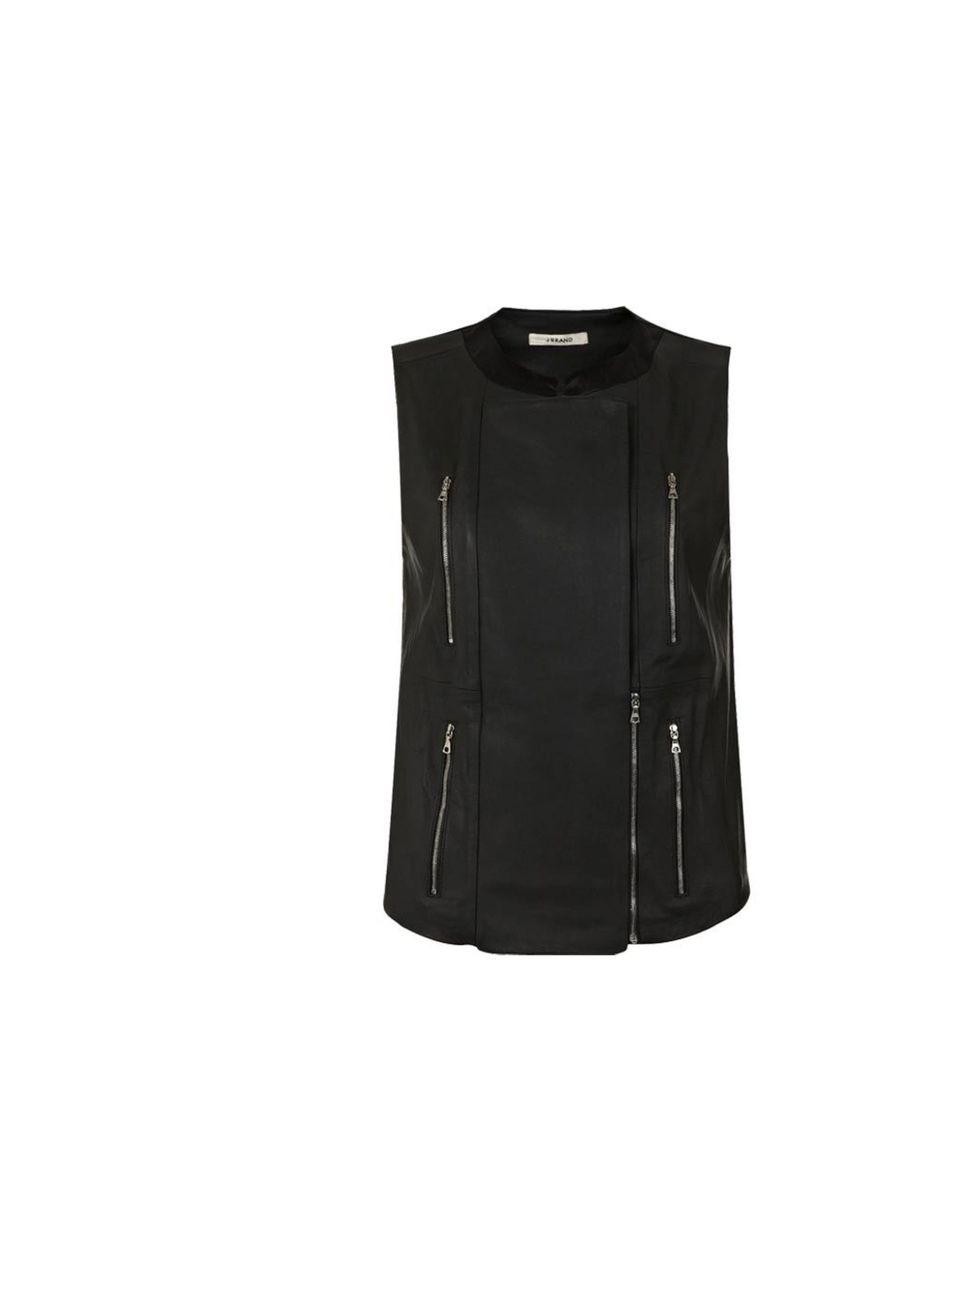 <p>J Brand 'Renee' sleeveless leather jacket, £750, at <a href="http://www.harrods.com/product/renee-leather-vest/j-brand/000000000003031824?cat1=bc-j-brand-rtw&amp;cat2=bc-j-brand-rtw-all">Harrods.com</a></p>